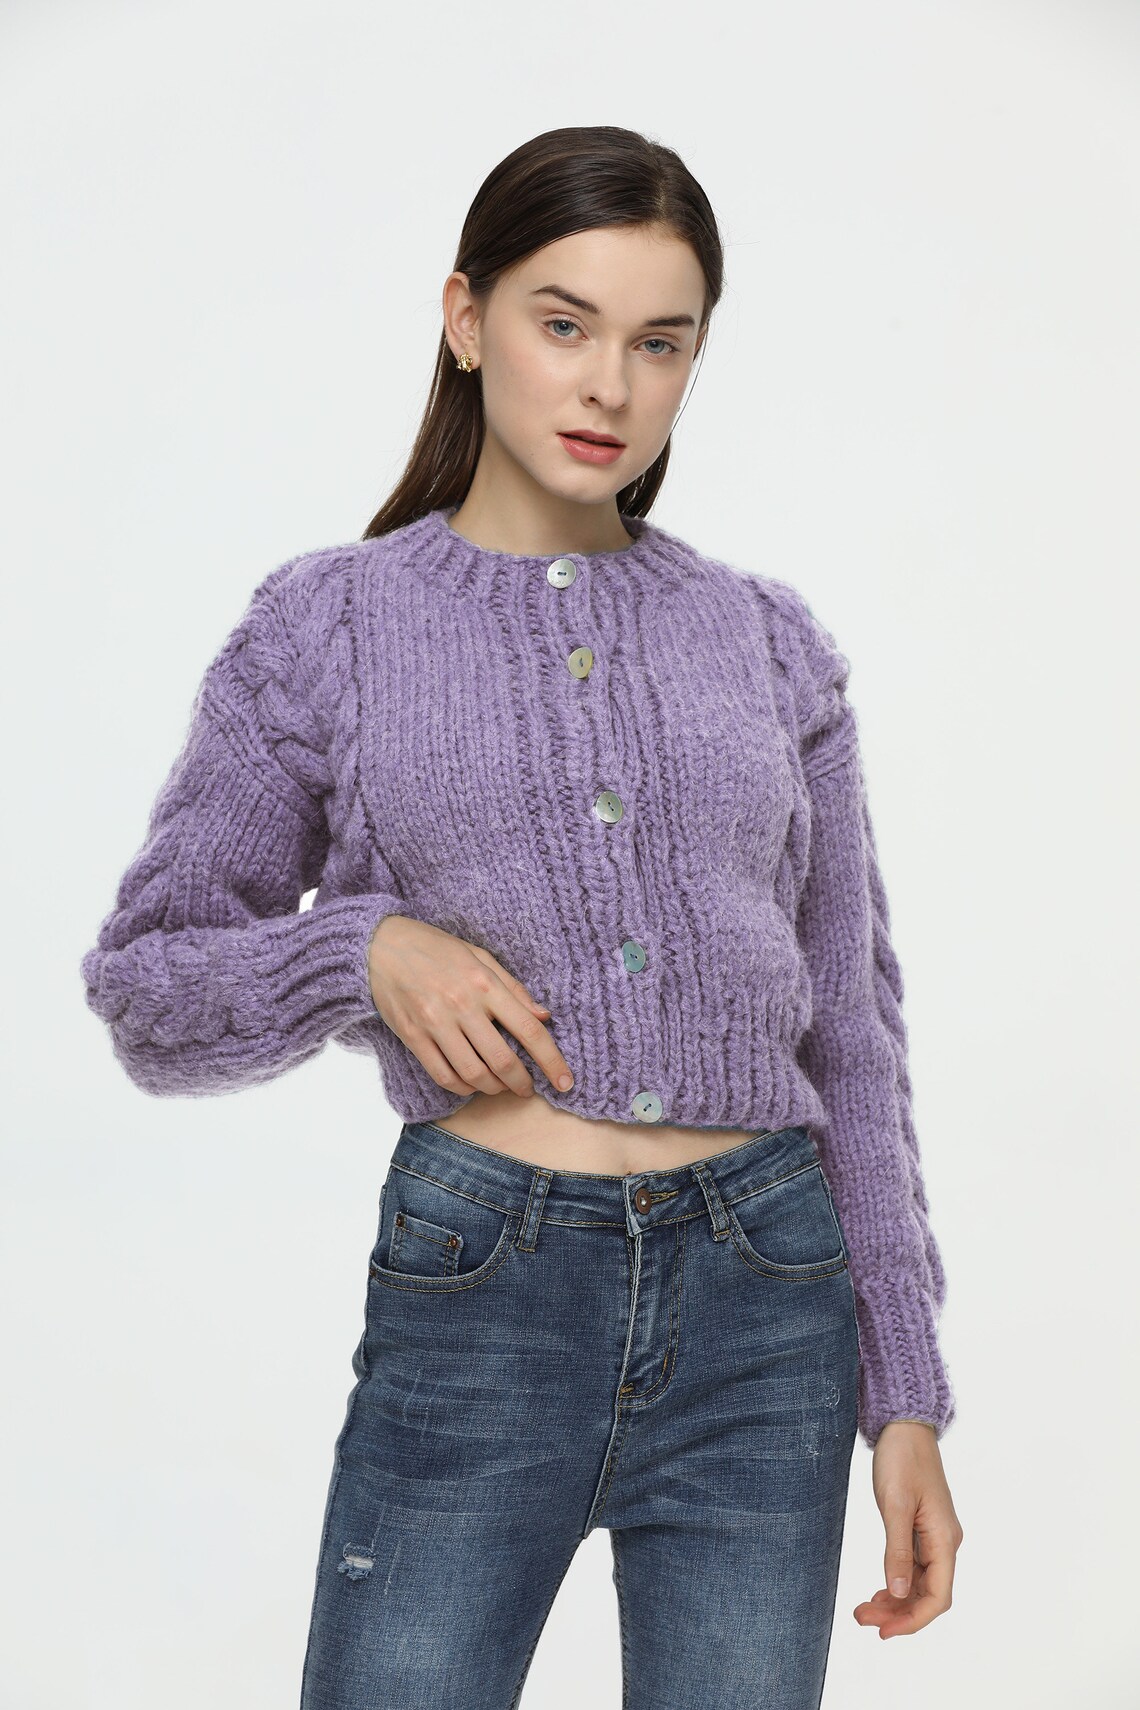 Hand Knit Woman Sweater Alpaca Cable Knit Short Cropped - Etsy